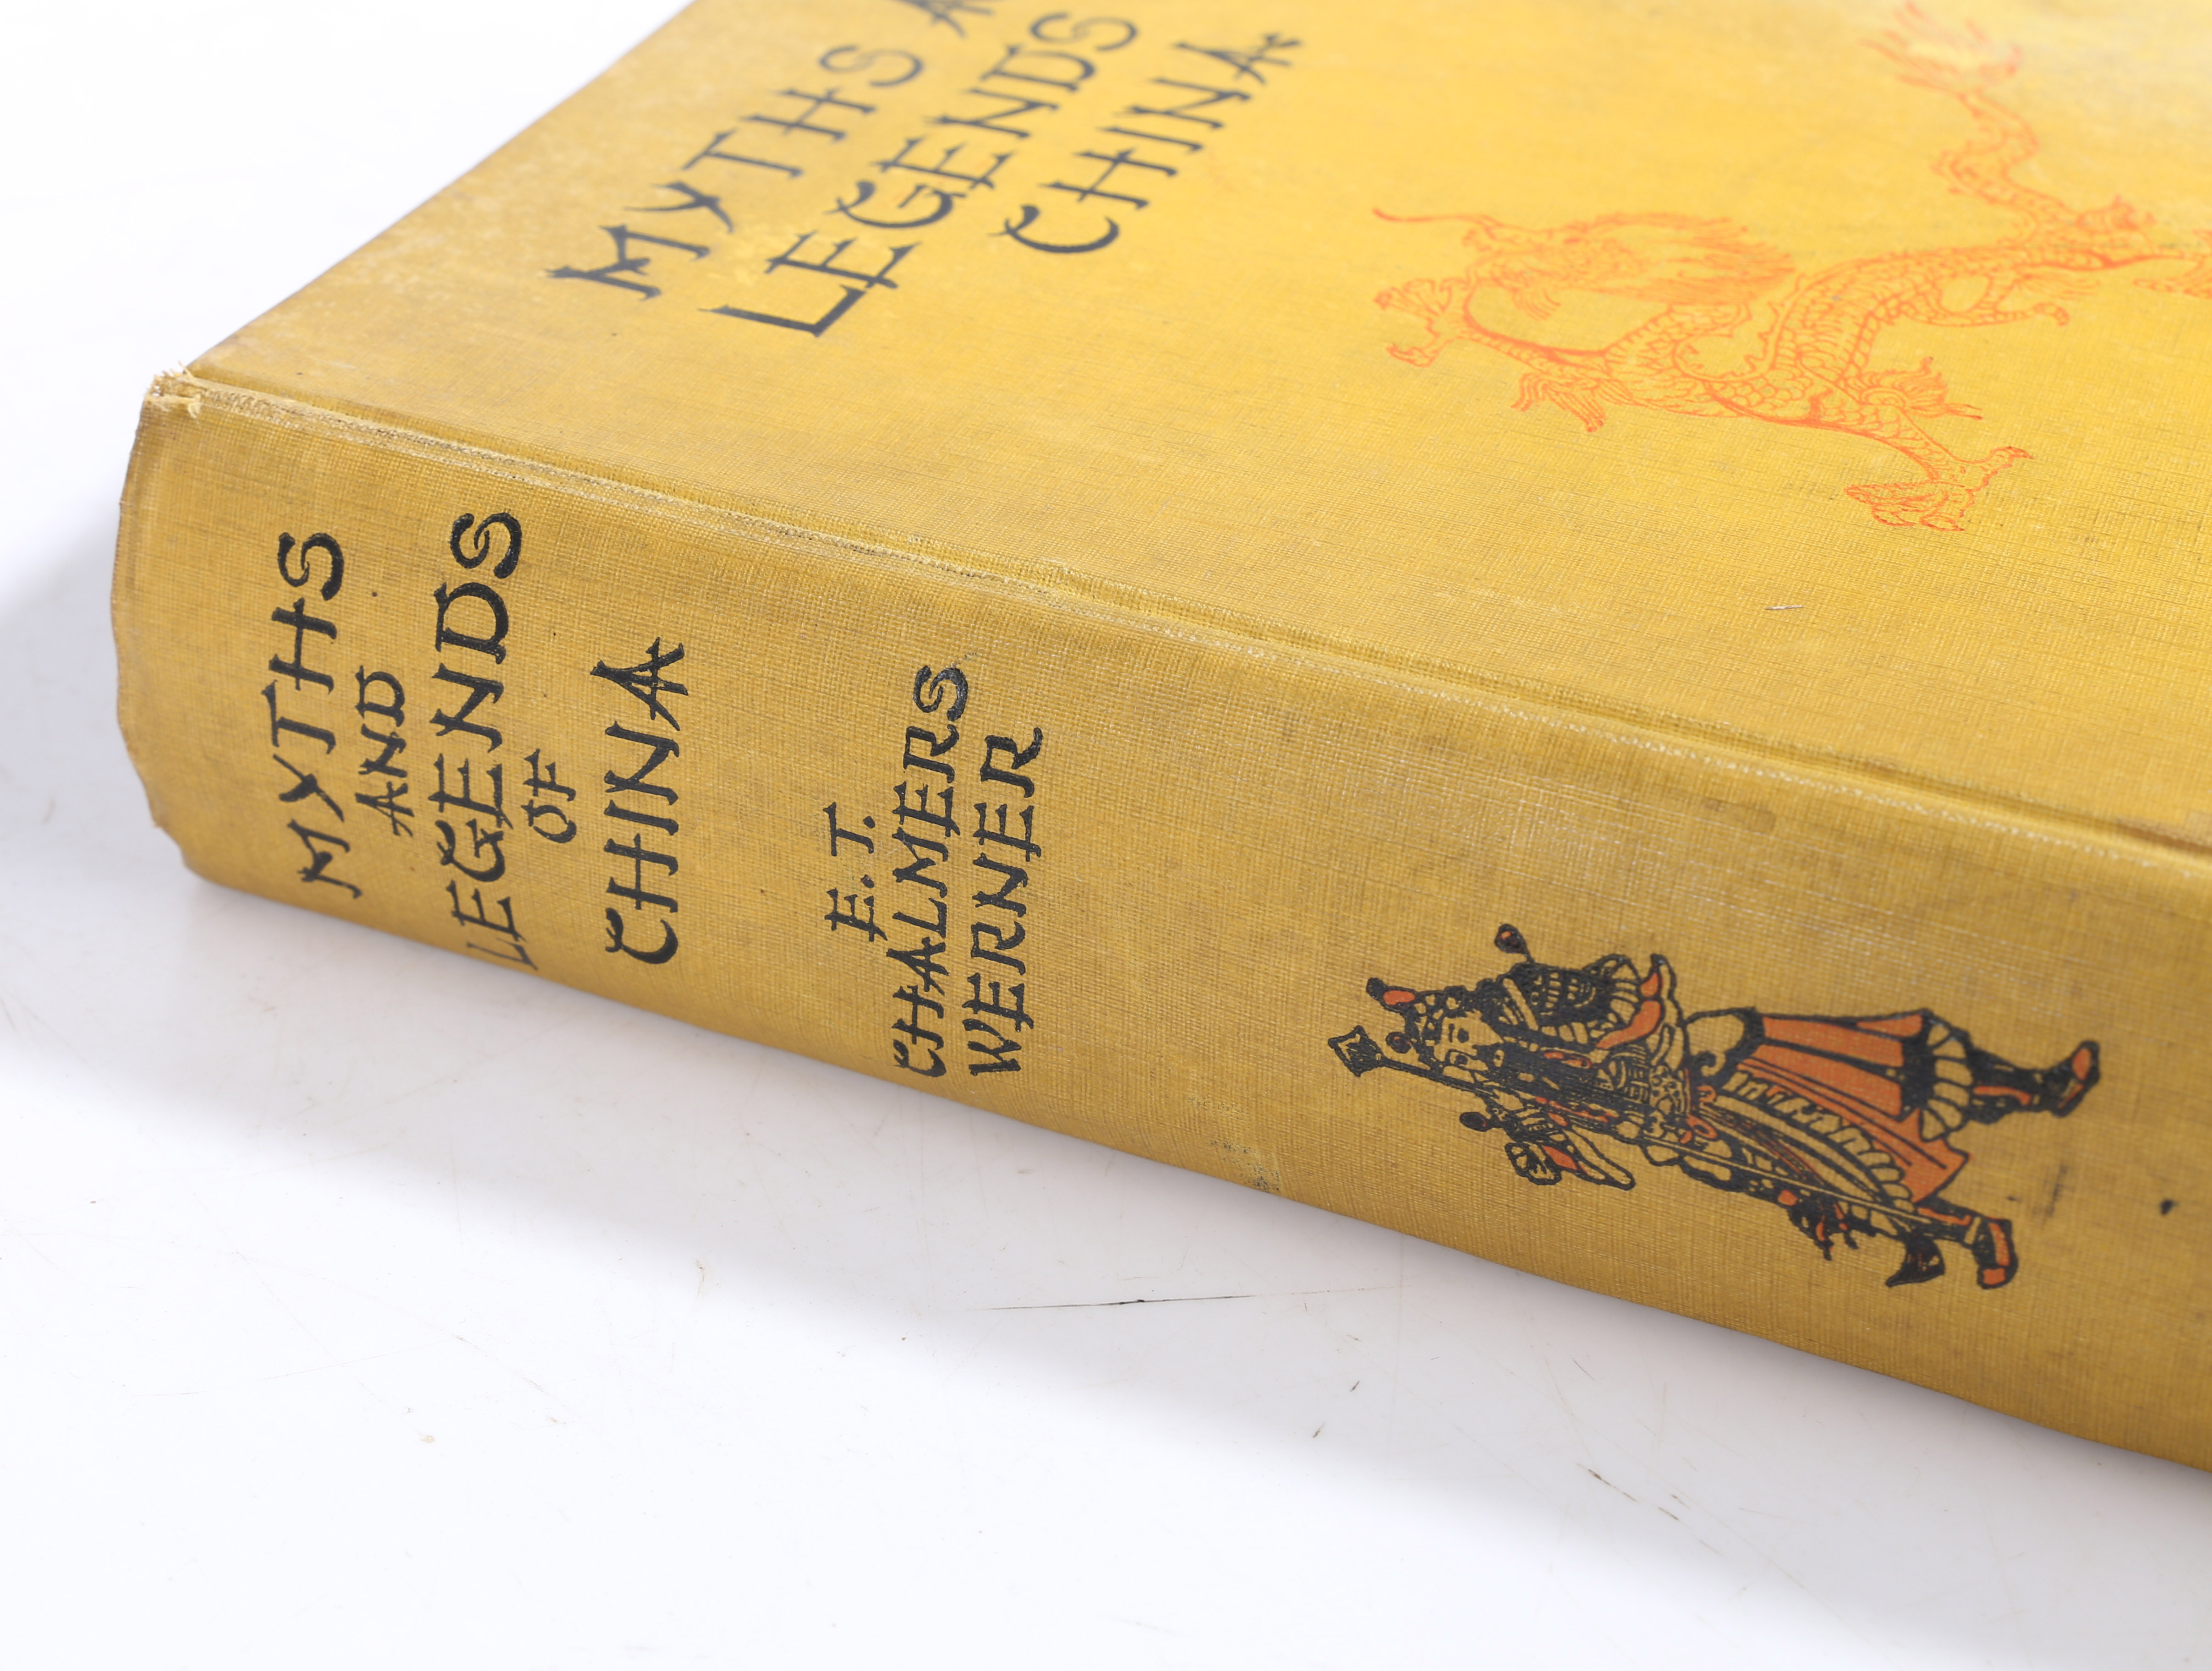 E. T. C. Werner "Myths And Legends Of China" first edition published by George G. Harrap & Co Ltd - Image 6 of 7